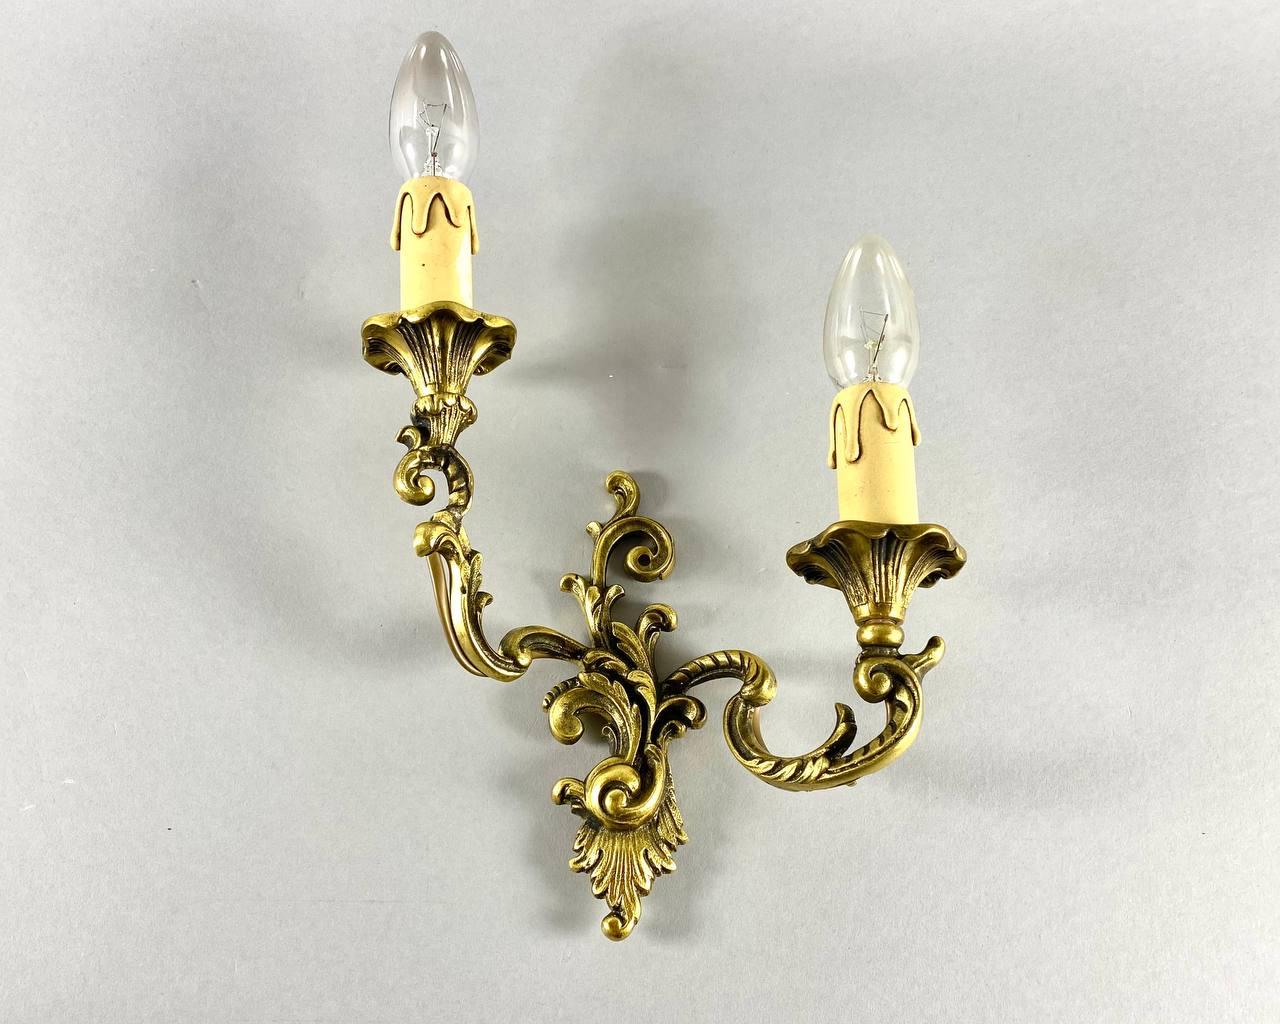 Mid-20th Century Elegant Vintage Gilt Brass Wall Sconce Two Arm Single Wall Lamp For Sale